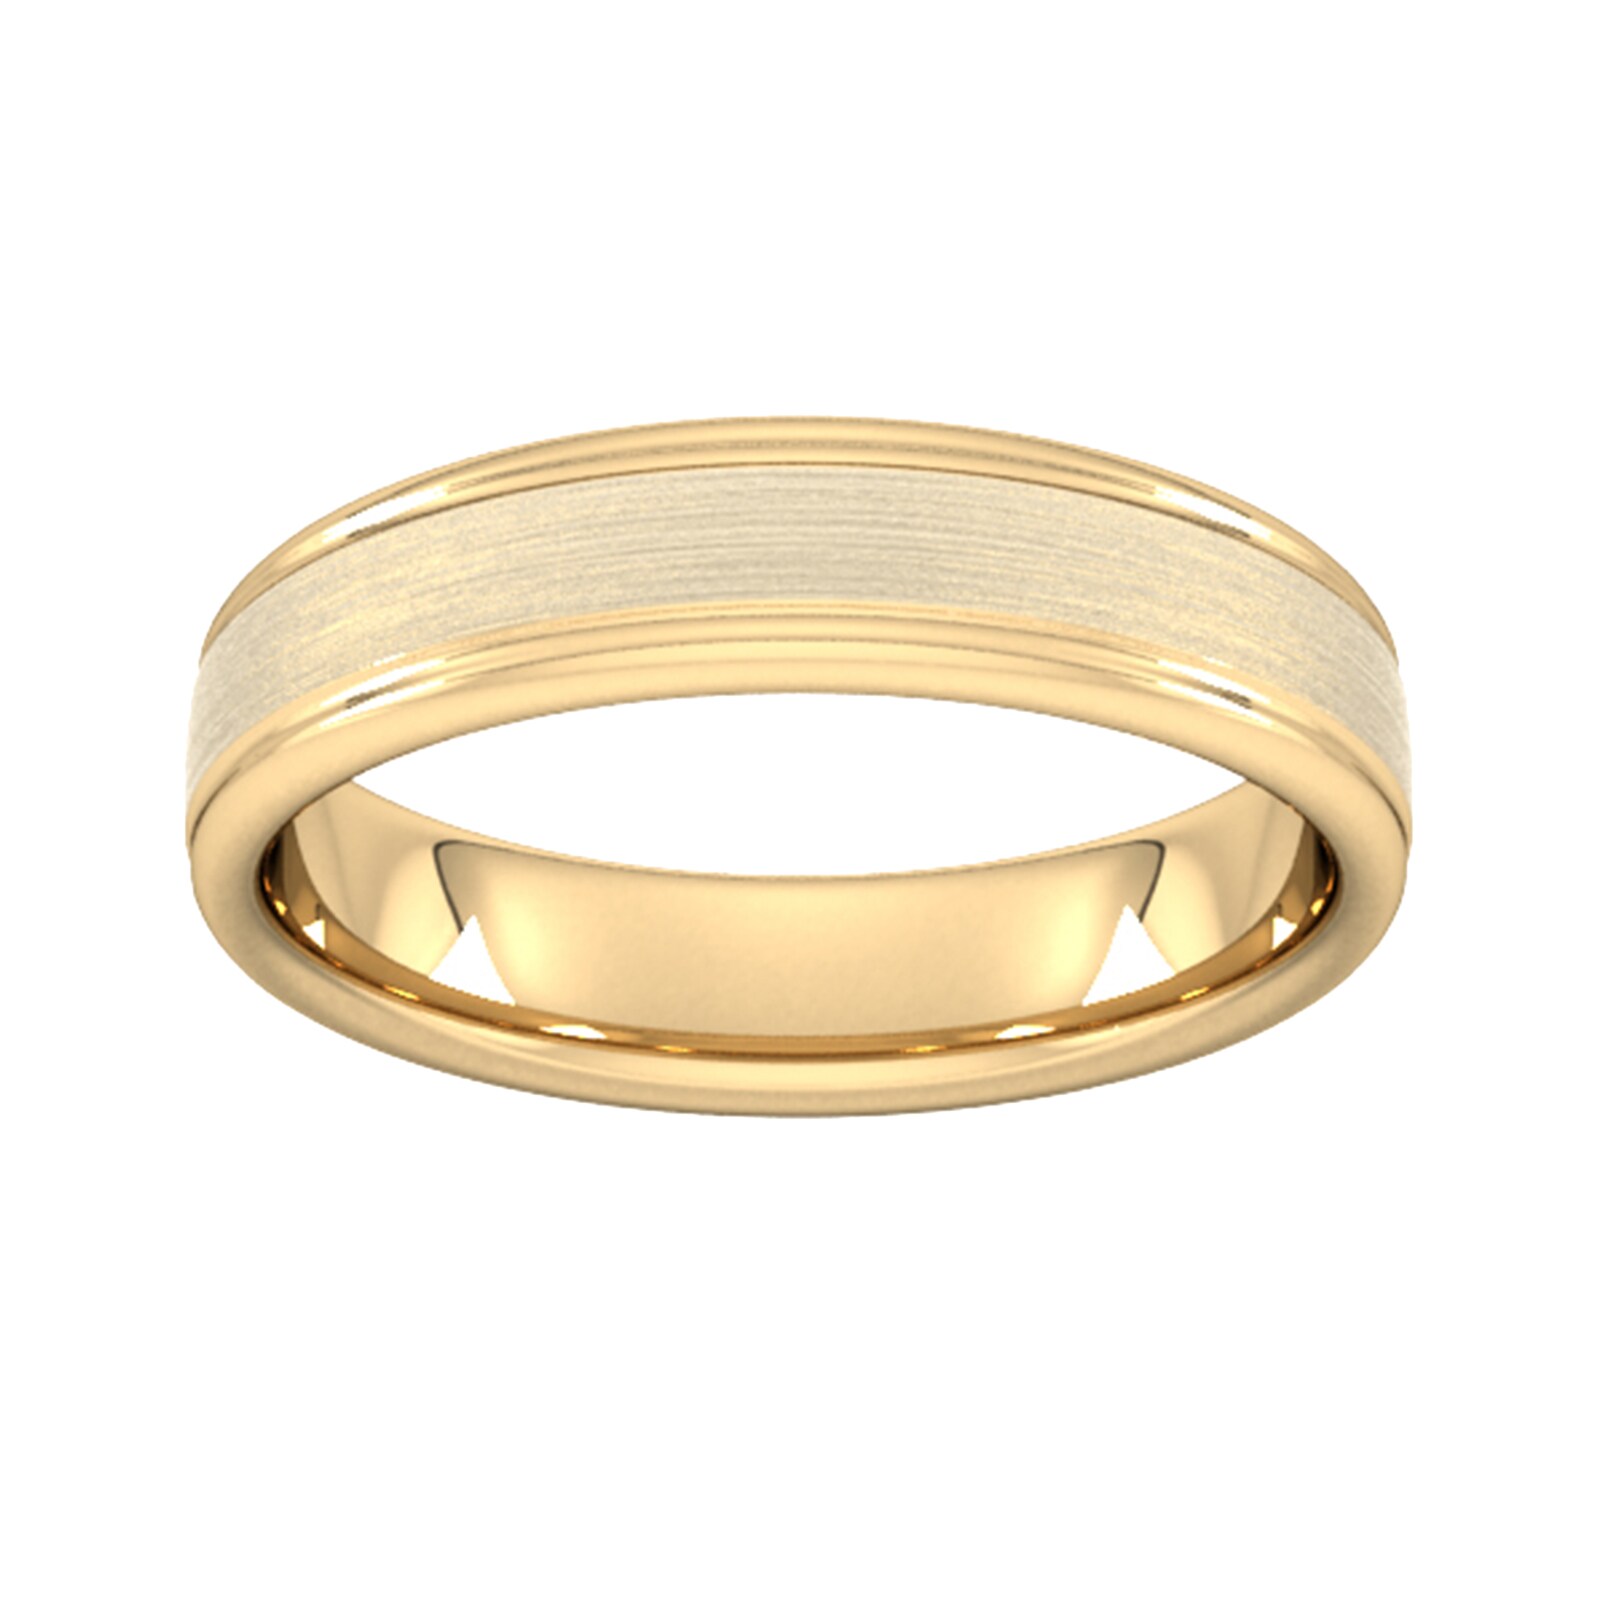 5mm Slight Court Extra Heavy Matt Centre With Grooves Wedding Ring In 18 Carat Yellow Gold - Ring Size X